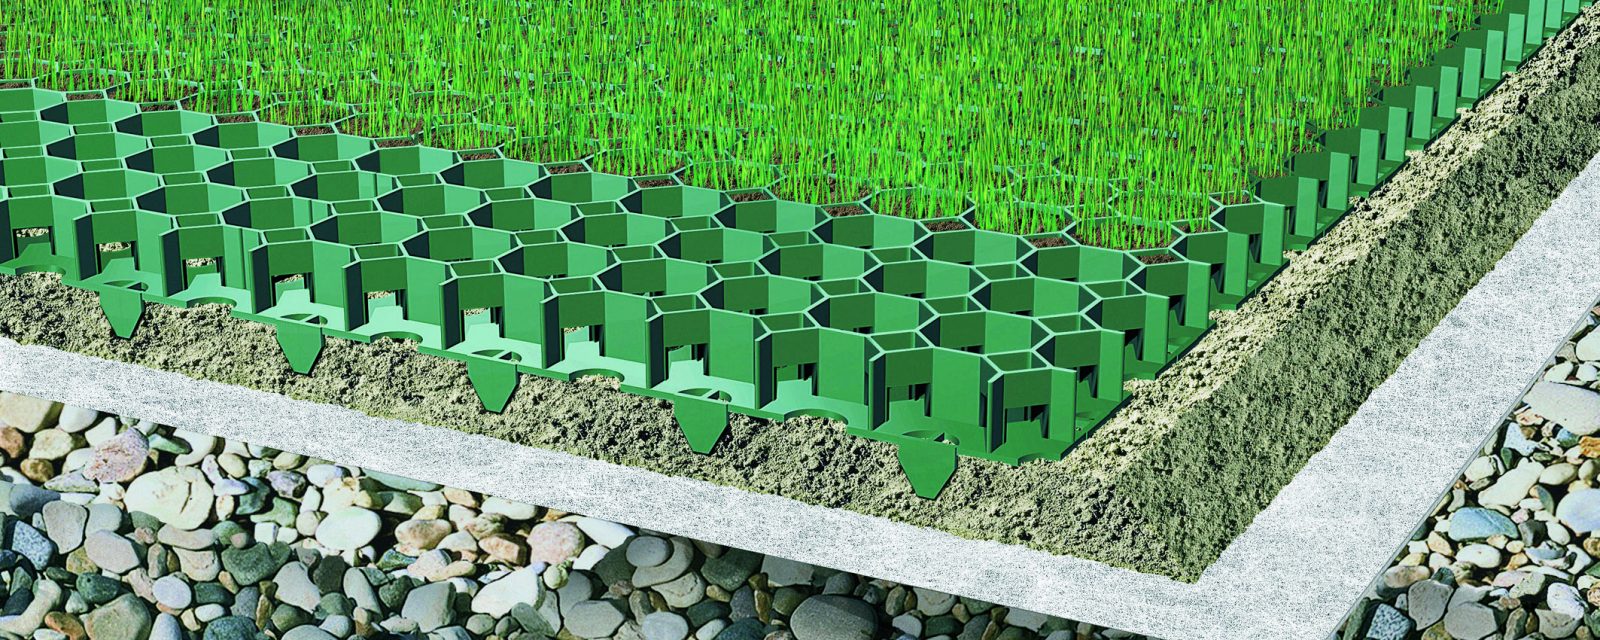 Substructure lawn grids